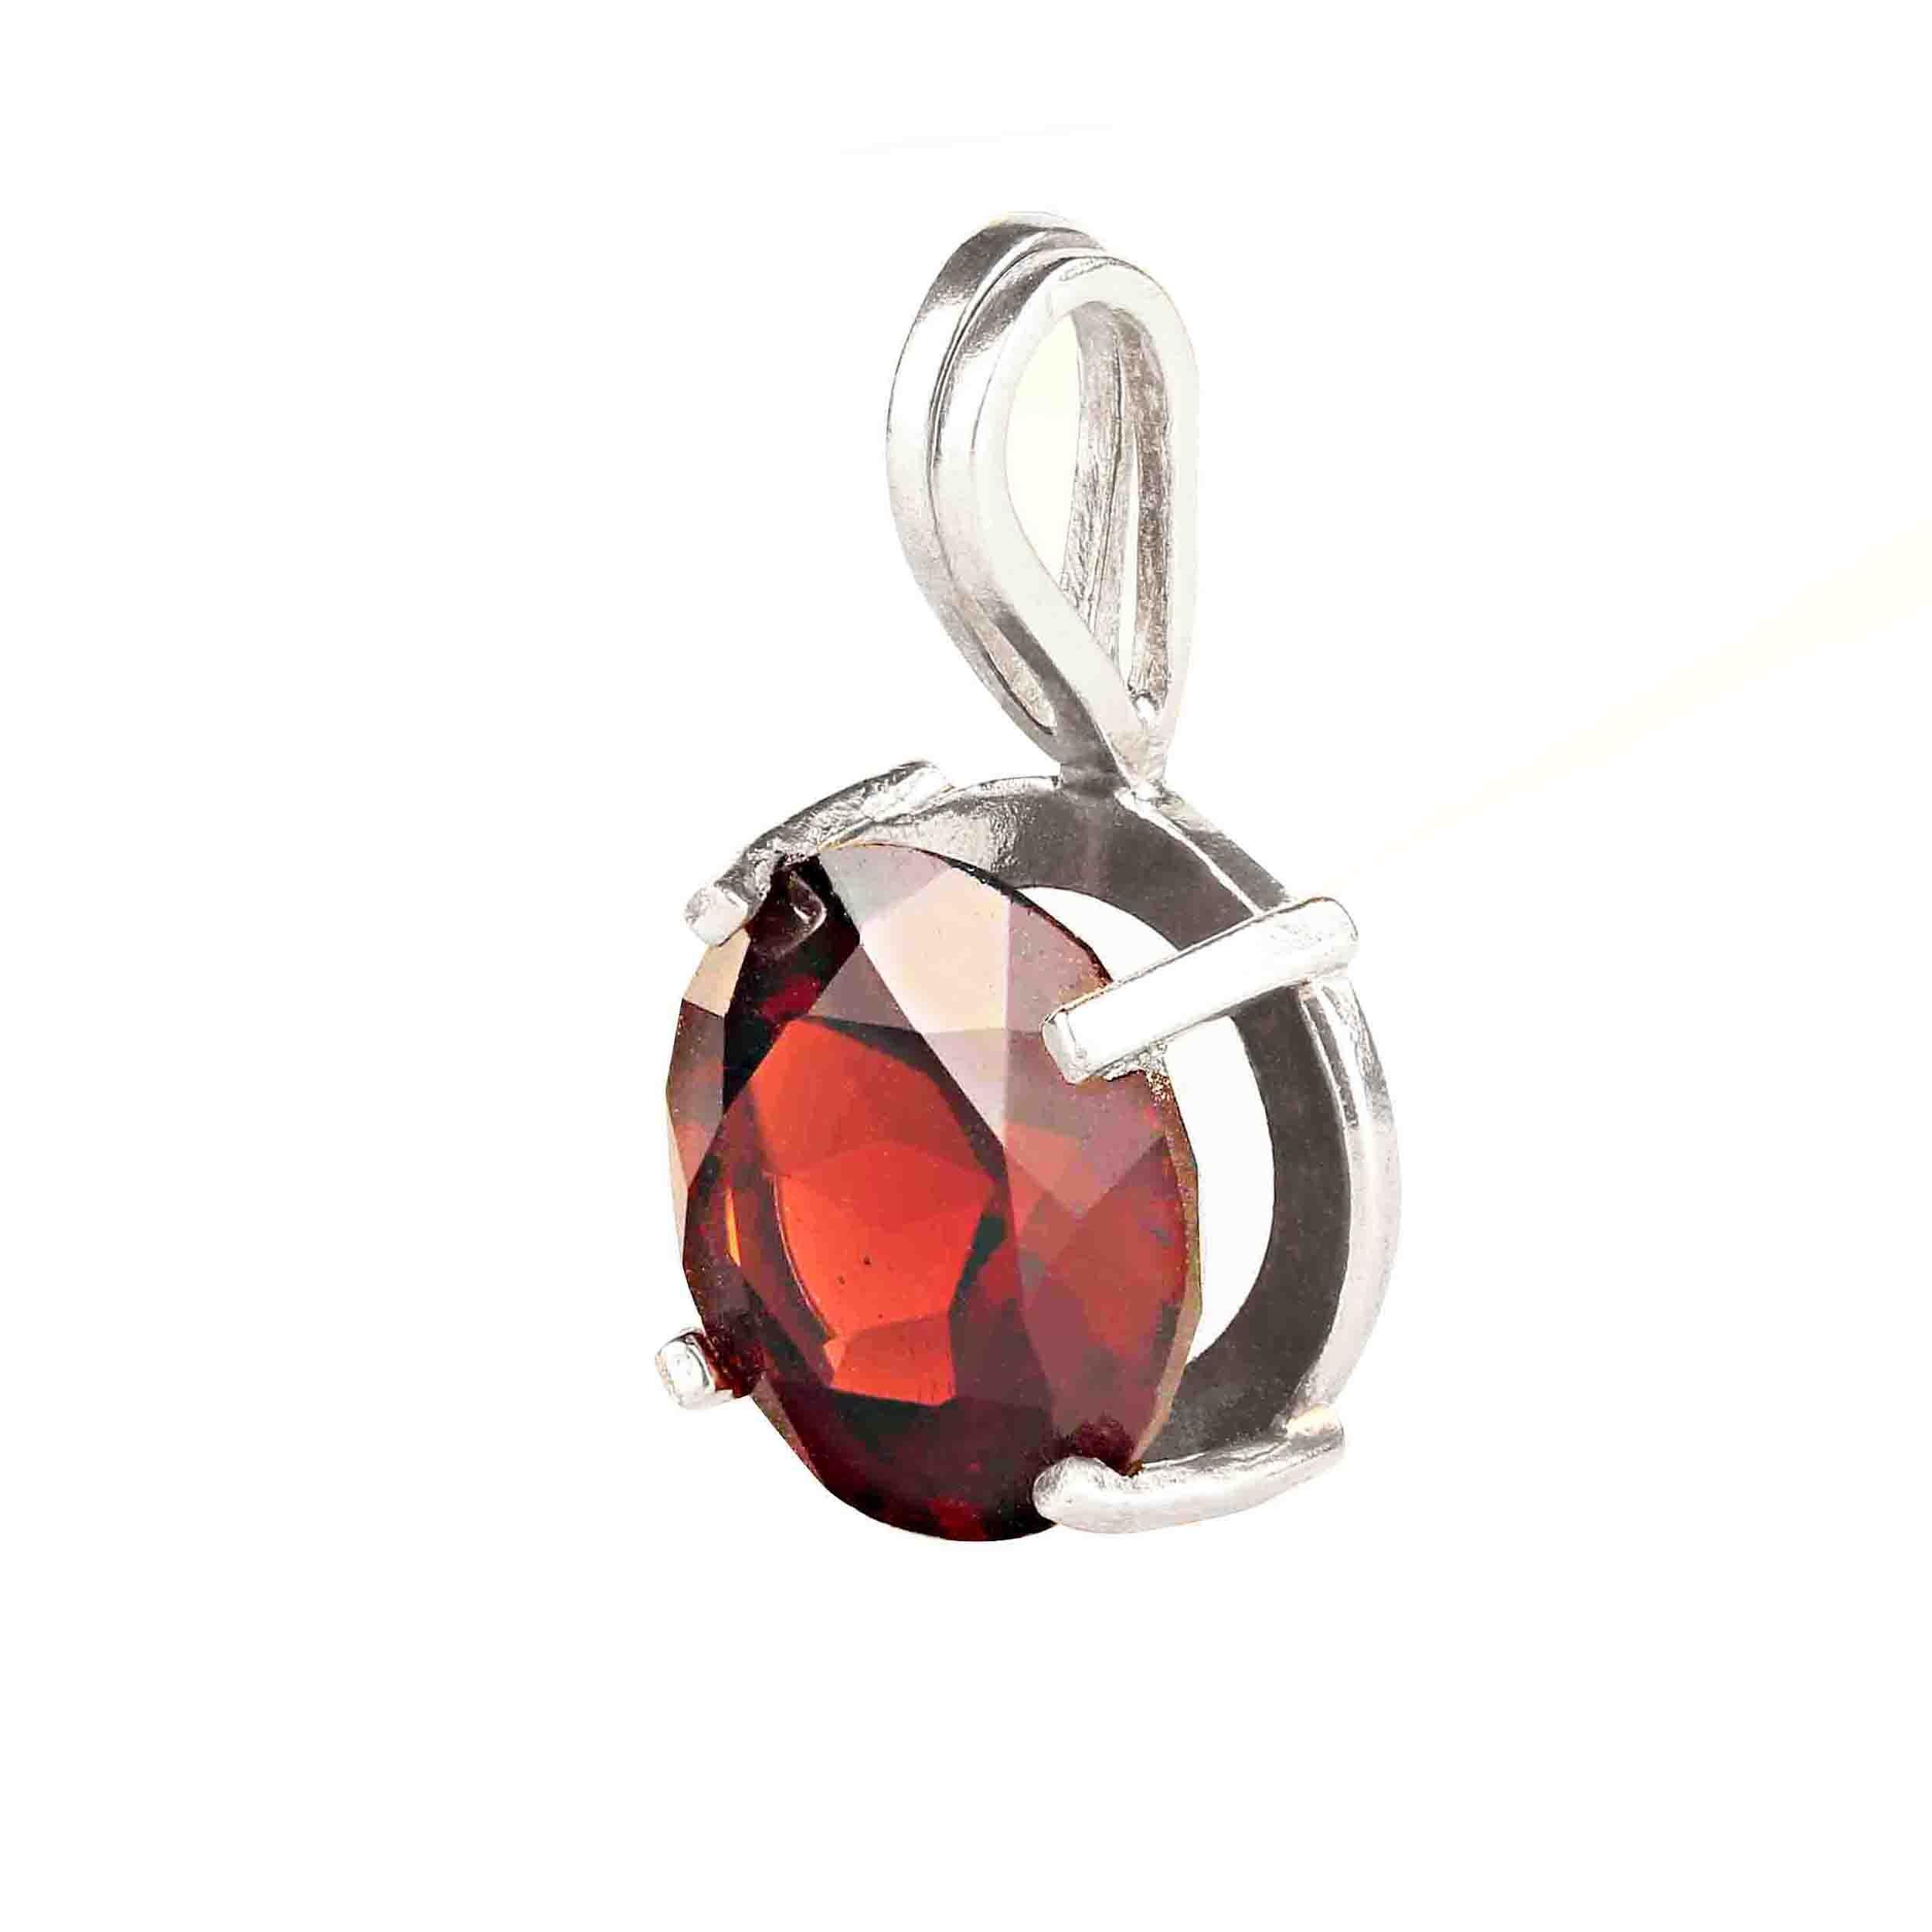 Artisan AJD Awesome Round 10MM Red Garnet and Sterling Silver Pendant For Sale